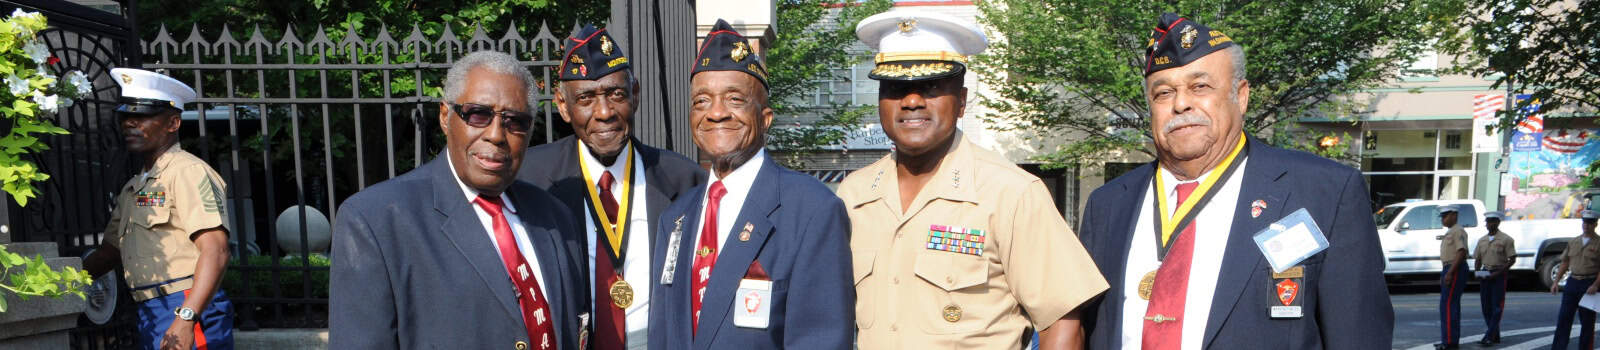 U.S. Marine Lt. Gen. Willie J. Williams, center right, the director of Marine Corps Staff, poses for a photo with former Montford Point Marines prior to the breakfast held in their honor in Crawford Hall at Marine Barracks Washington, Washington D.C., Aug. 26, 2011.